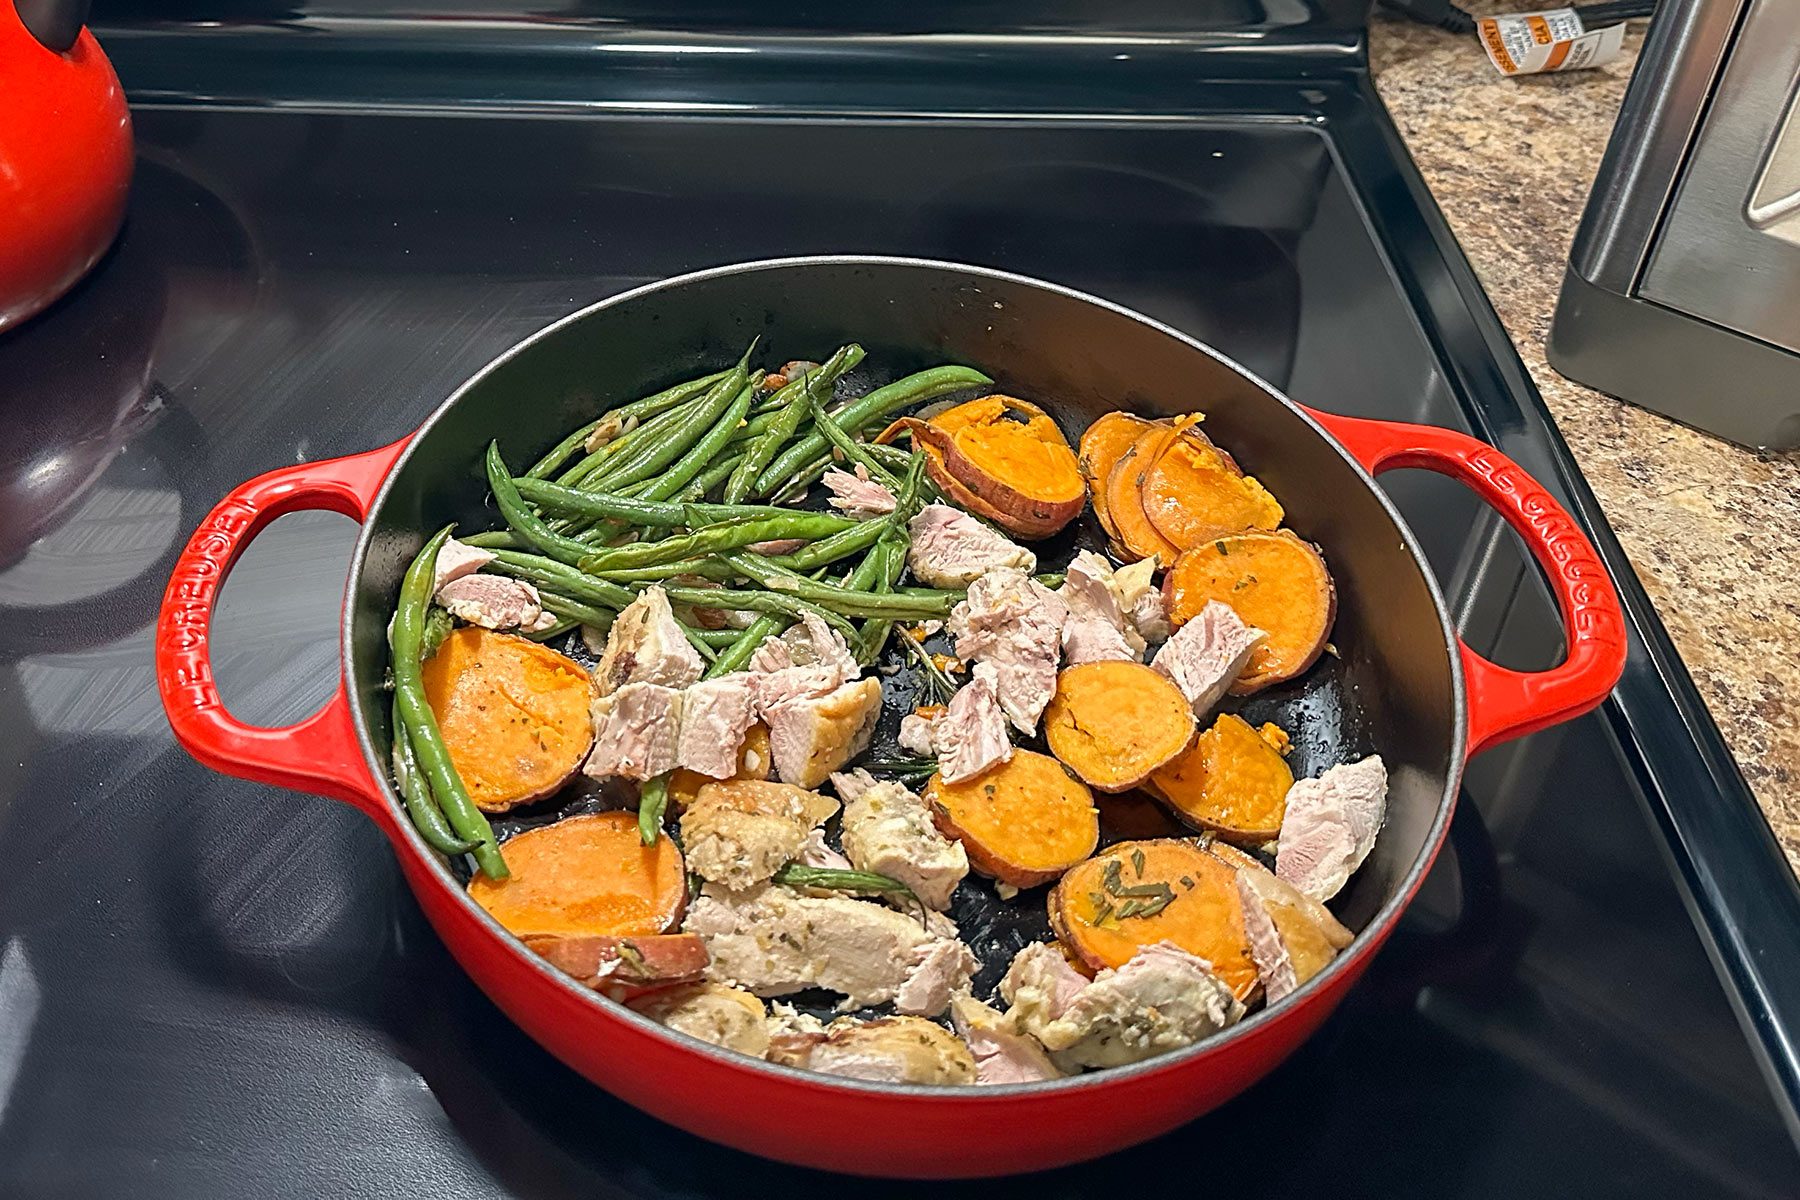 Le Creuset Signature Thyme Everyday Pan + Reviews